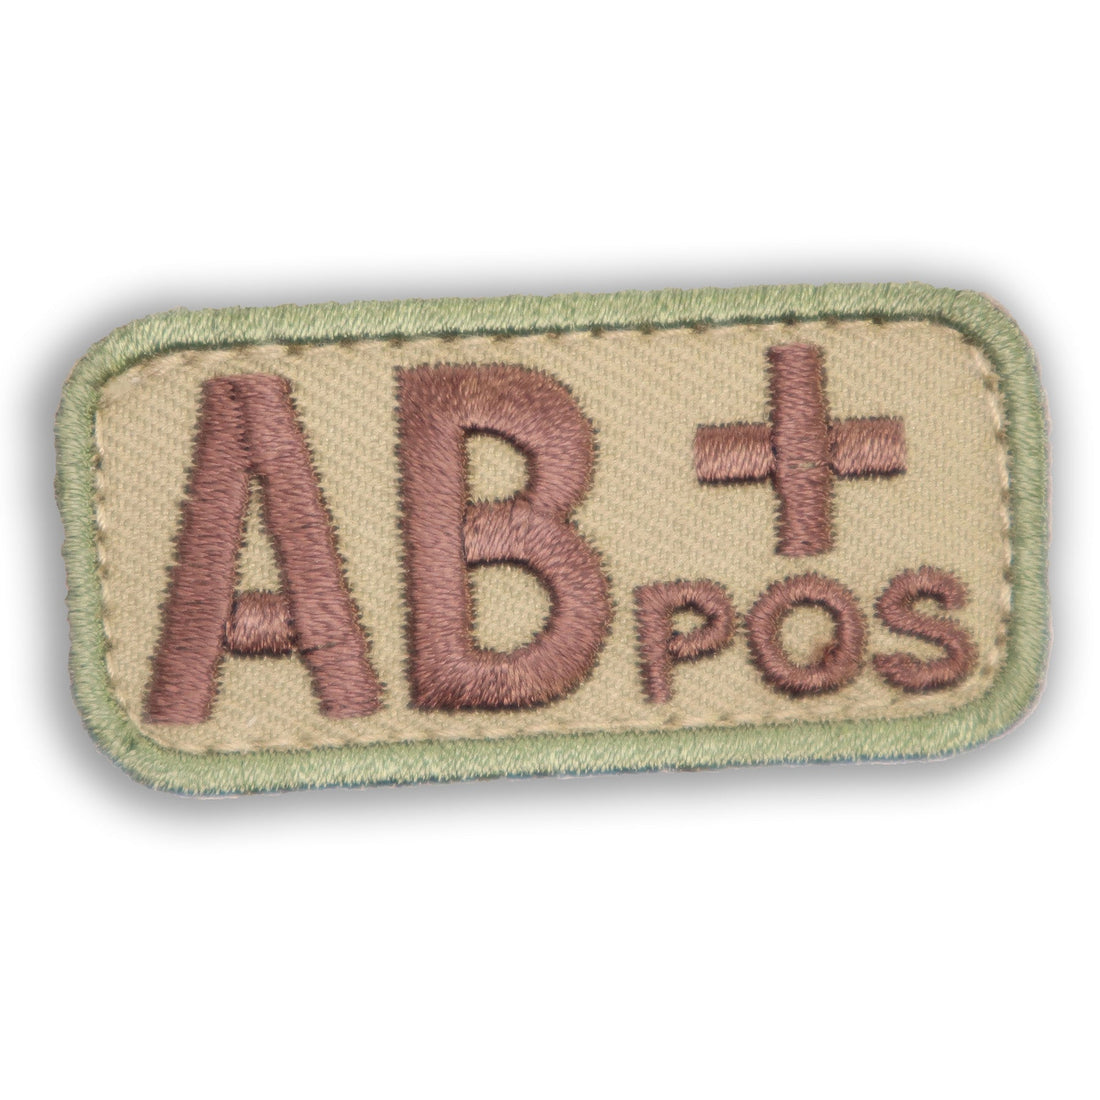 Supplies - Identification - Morale Patches - Mil-Spec Monkey Blood Type Patch